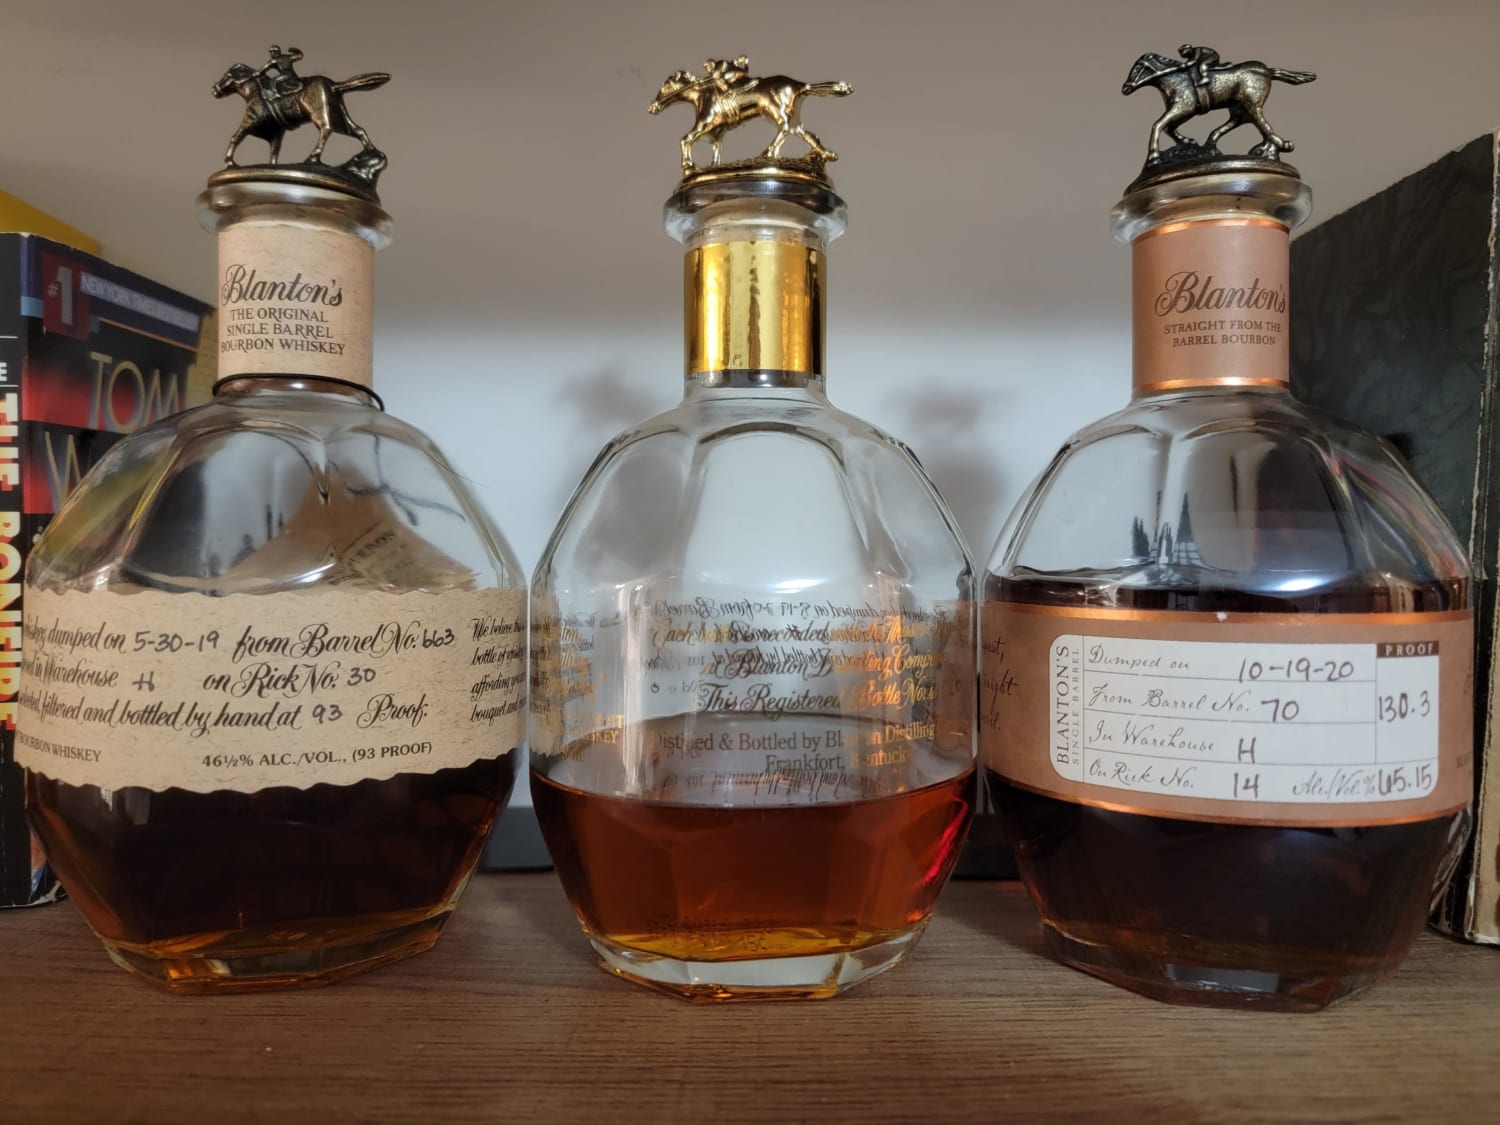 Pacing the Ponies! Blanton's Single Barrel, Gold, Straight from the Barrel